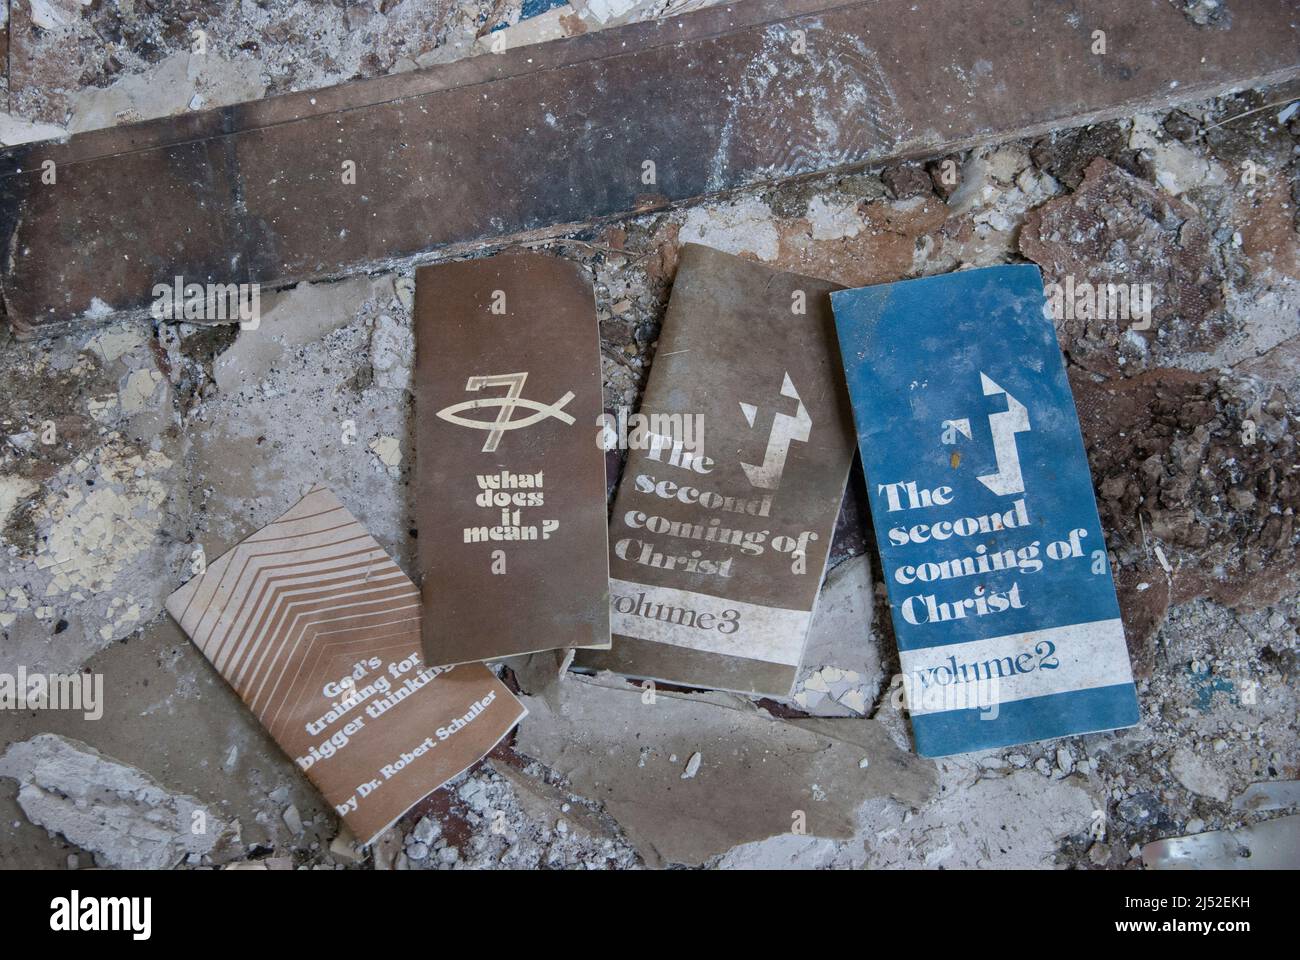 Religious leaflets with titles 'God's training for bigger thinking', 'What does it mean?', and 'The second Coming of Christ' inside a derelict church. Stock Photo